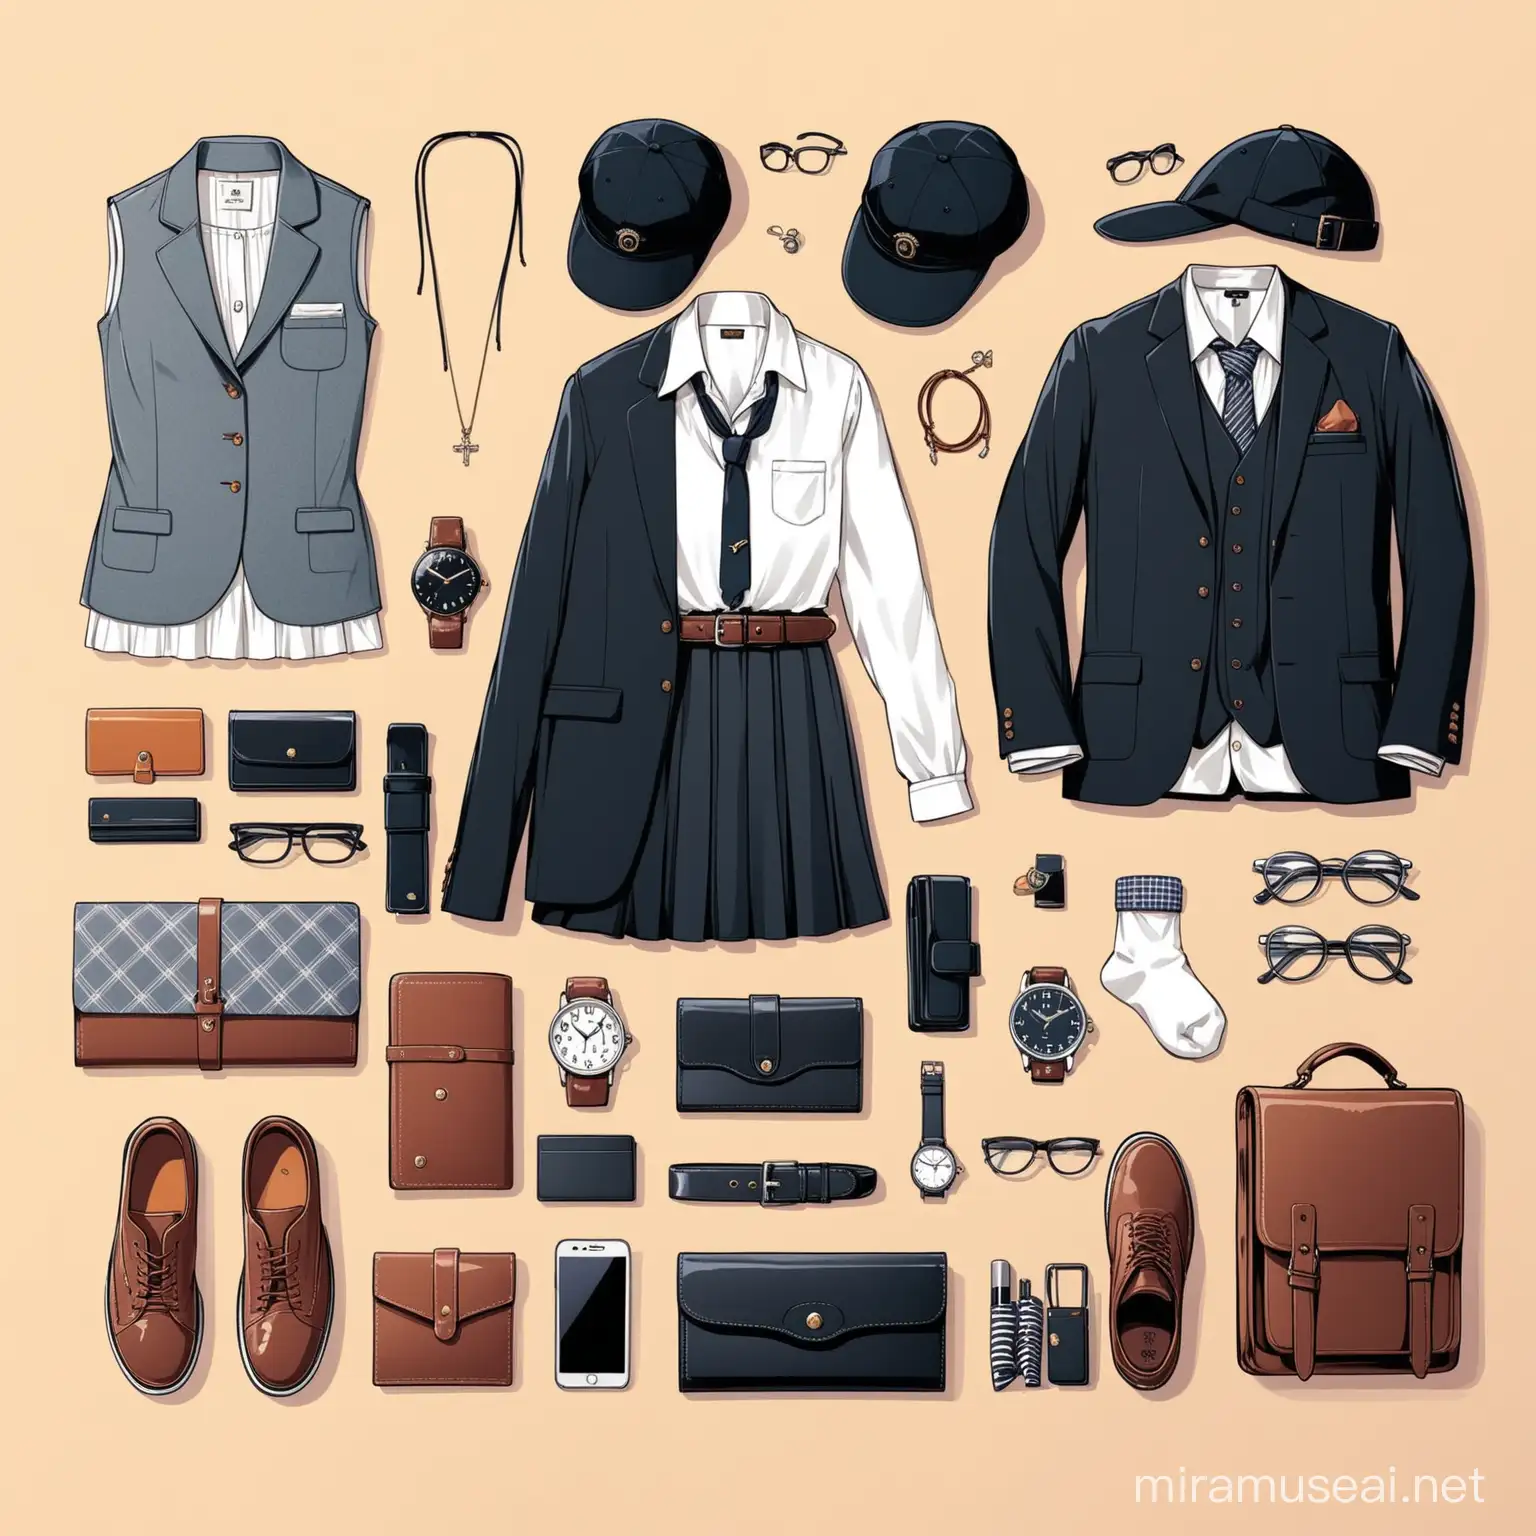 Knolling. Clothes and accesories. Gloves, scarf, skirt, blouse, shirt, cap, hat, glasses, earrings, necklace, hat, watch, pyjamas, dress, suit, black belt, wallet, jumper, tie, boots, sneakers, socks